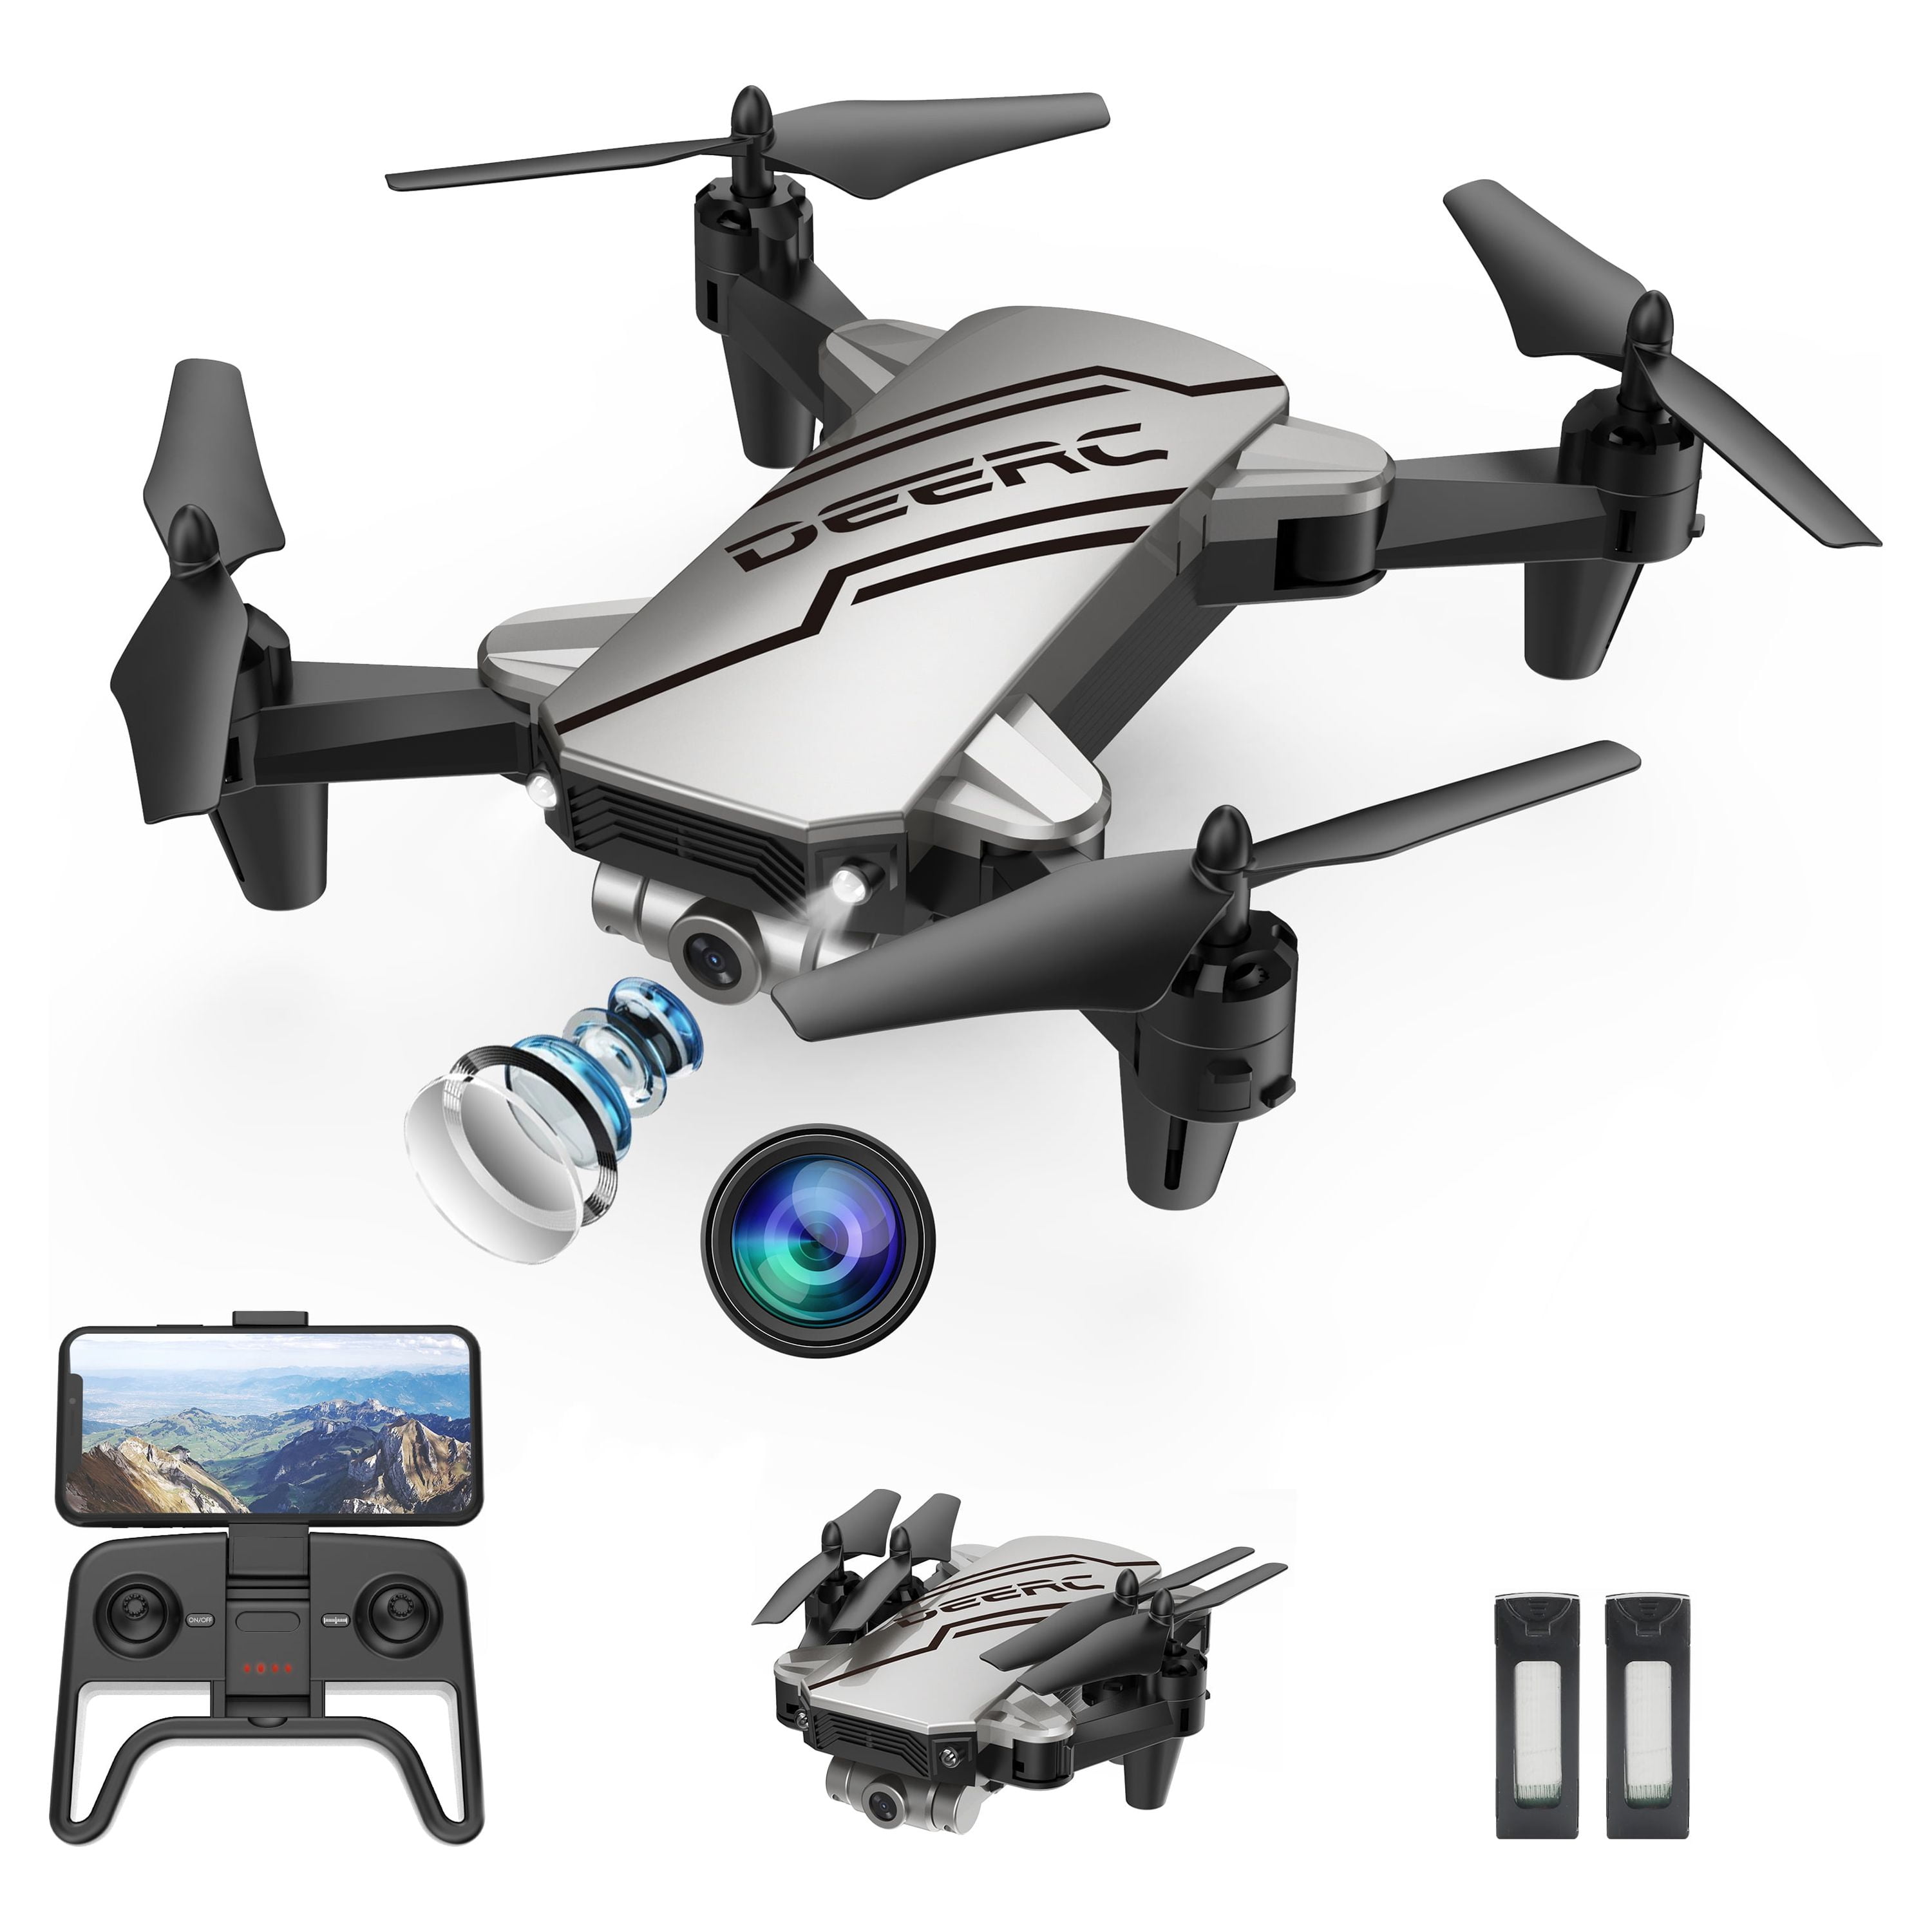 Potensic D58 GPS RC Drone With 1080P Camera 5G WiFi FPV Quadcopter  Professional Helicopters Toys Long Flight Time Kids Toy 210325 From  Kong005, $556.29